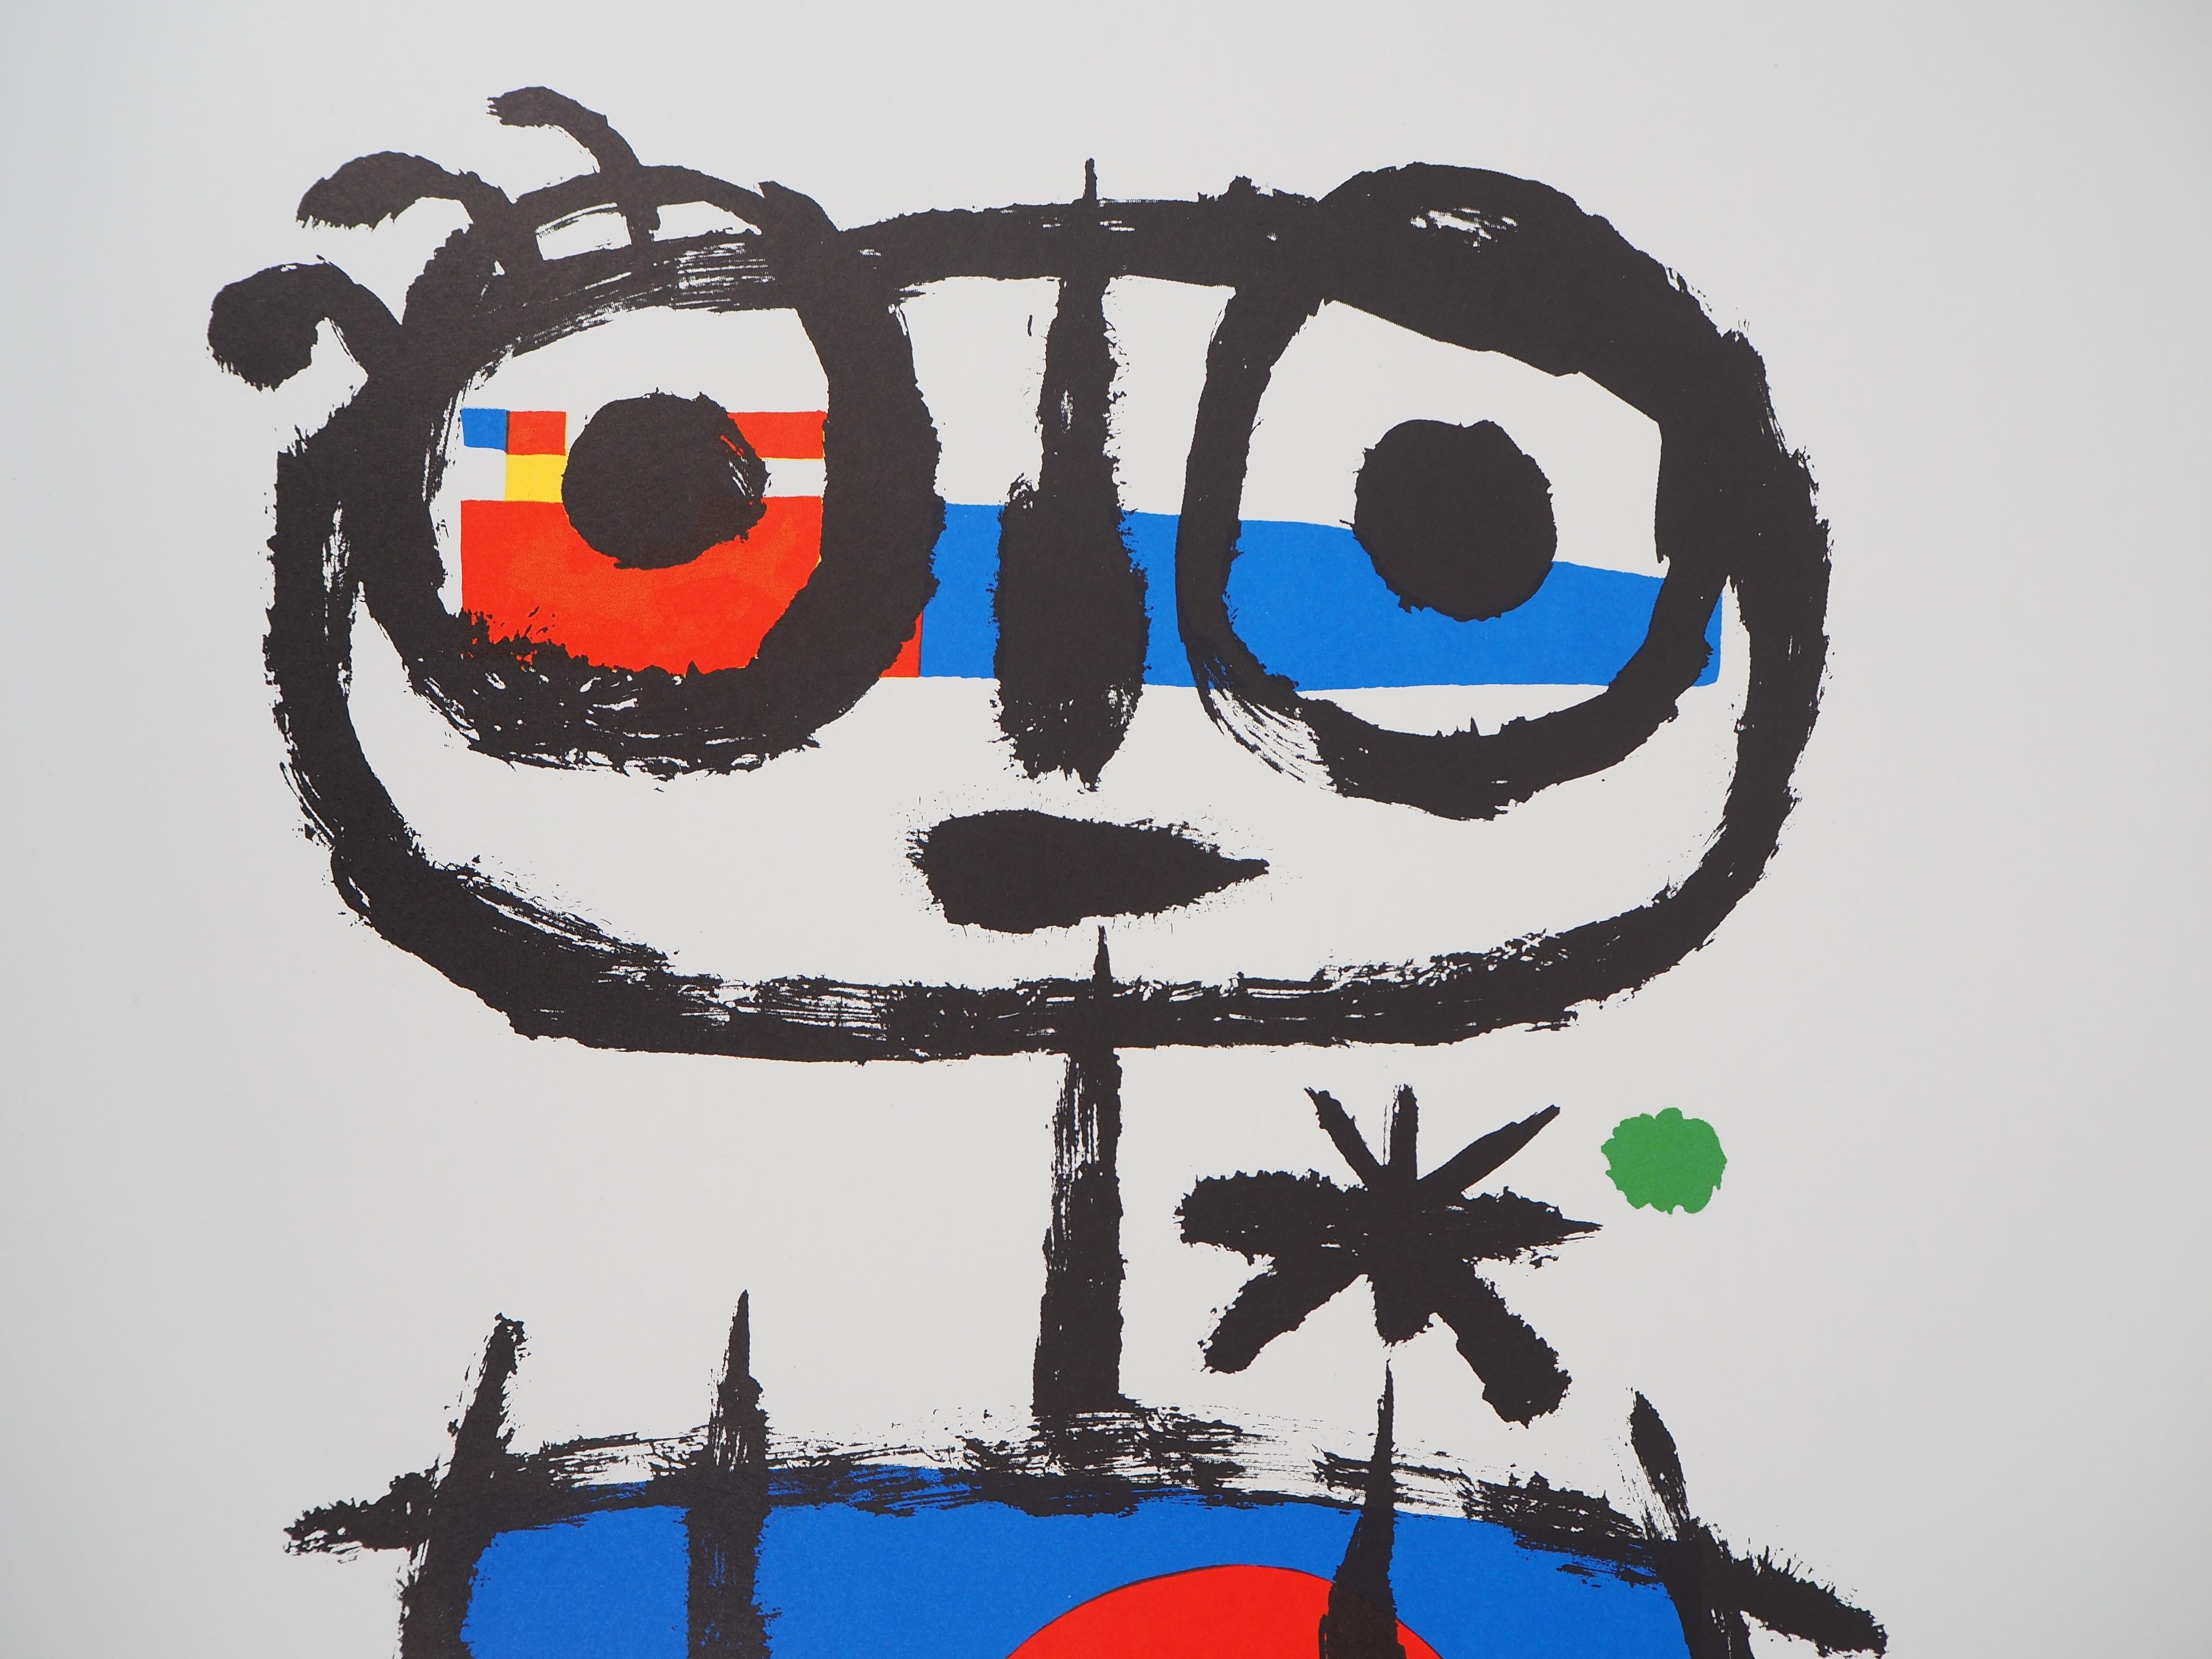 Imaginary Boy with Red Sun - Lithograph - Abstract Print by (after) Joan Miró